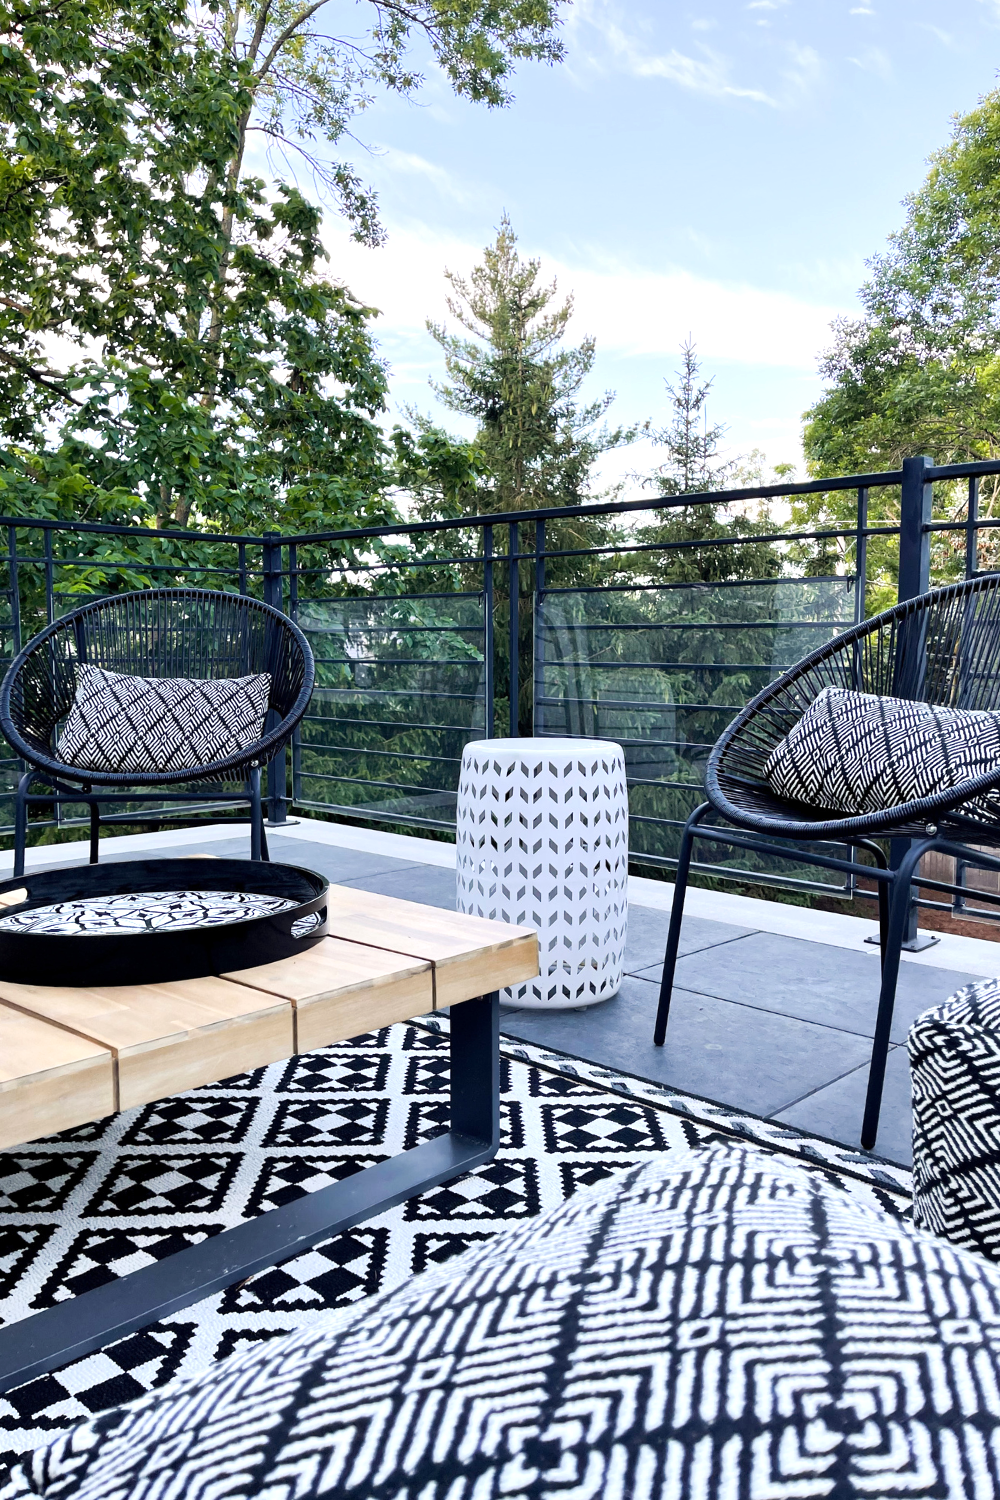 Outdoor seating area with black circle chairs, a printed rug, wood table, and poufs